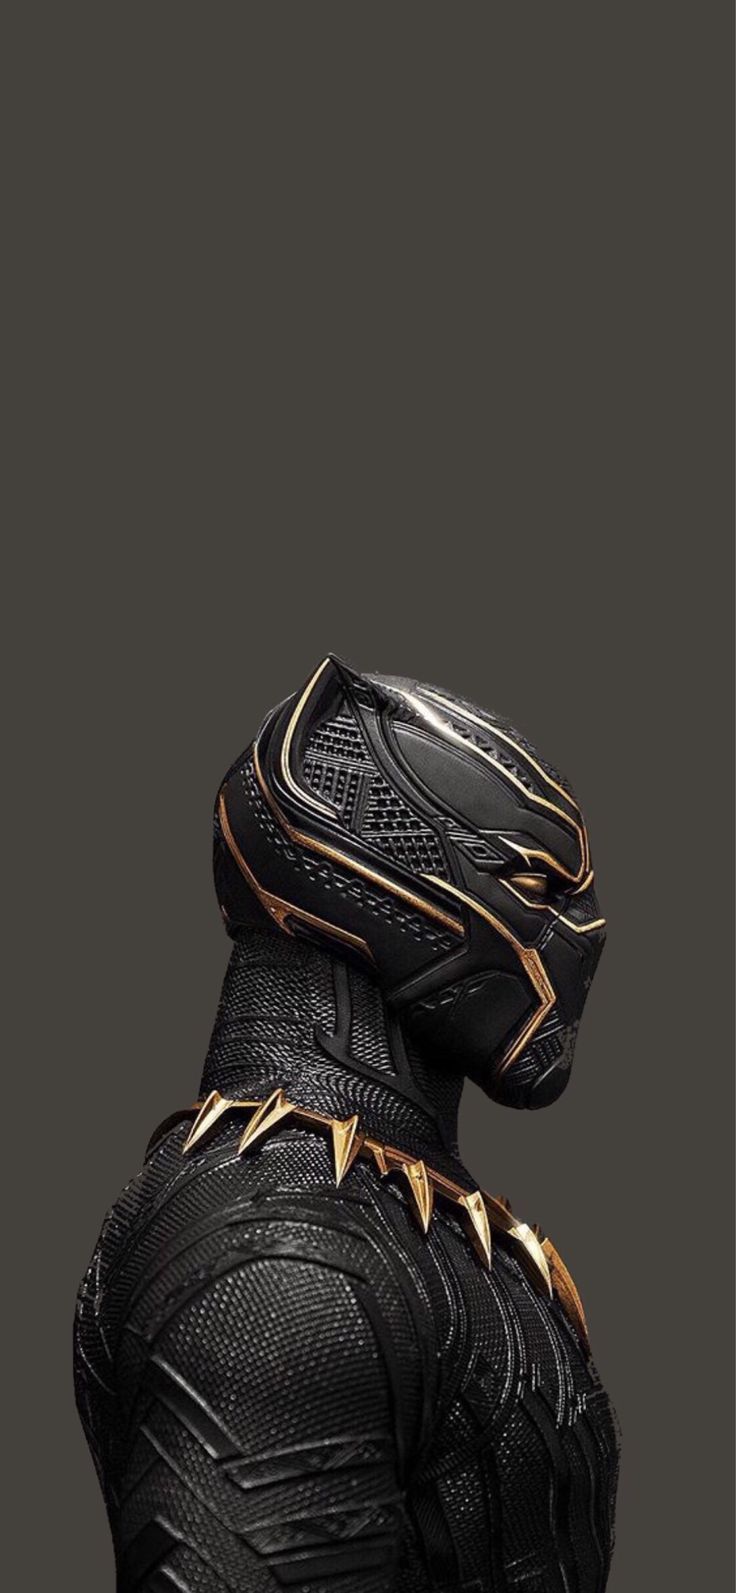 Black panther HD wallpaper background mobile iphone and Android